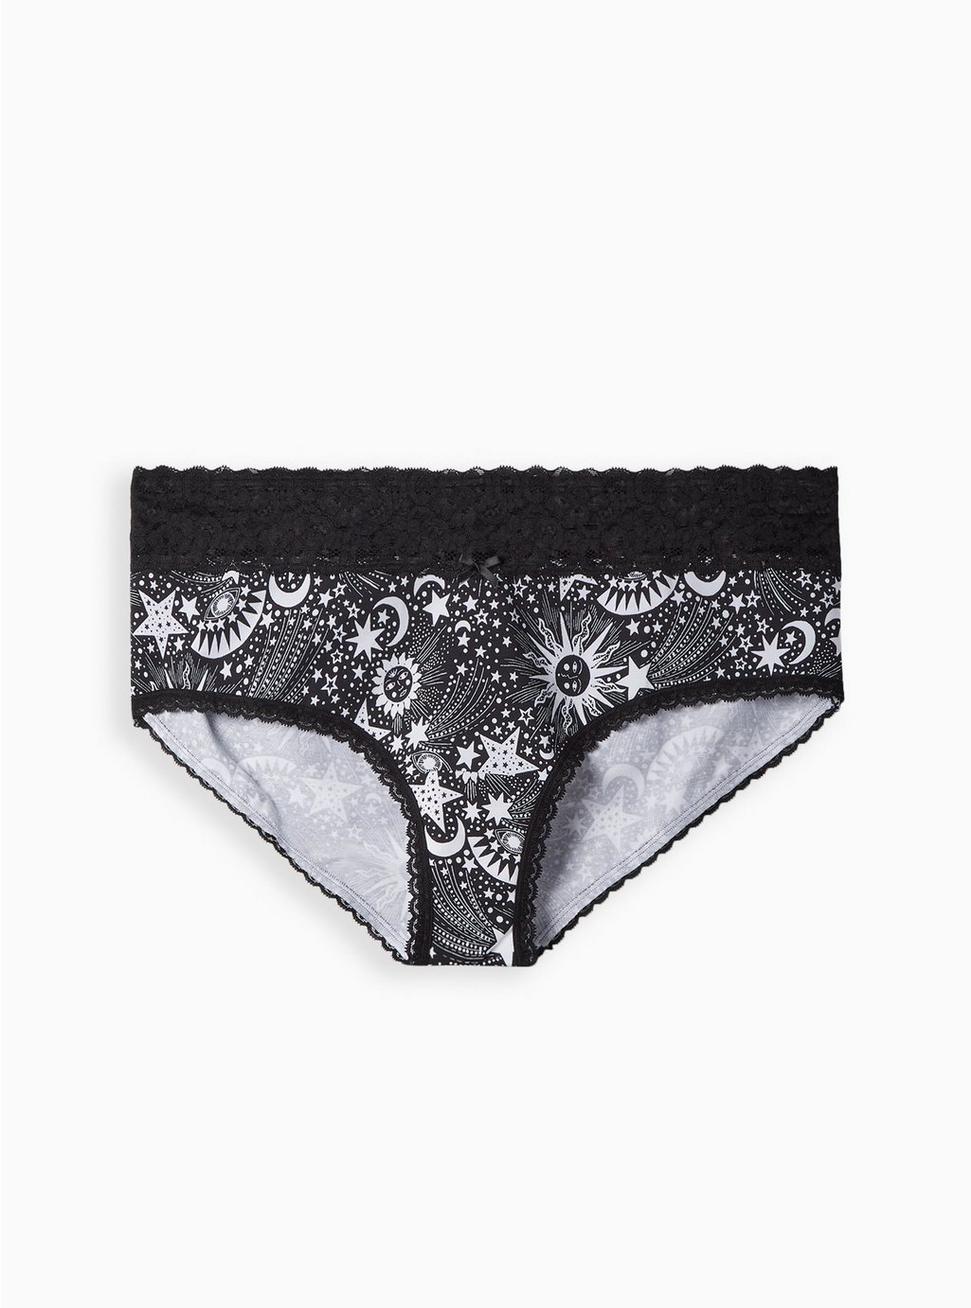 Cotton Mid-Rise Cheeky Lace Trim Panty, HEART OF GOLD BLACK, hi-res